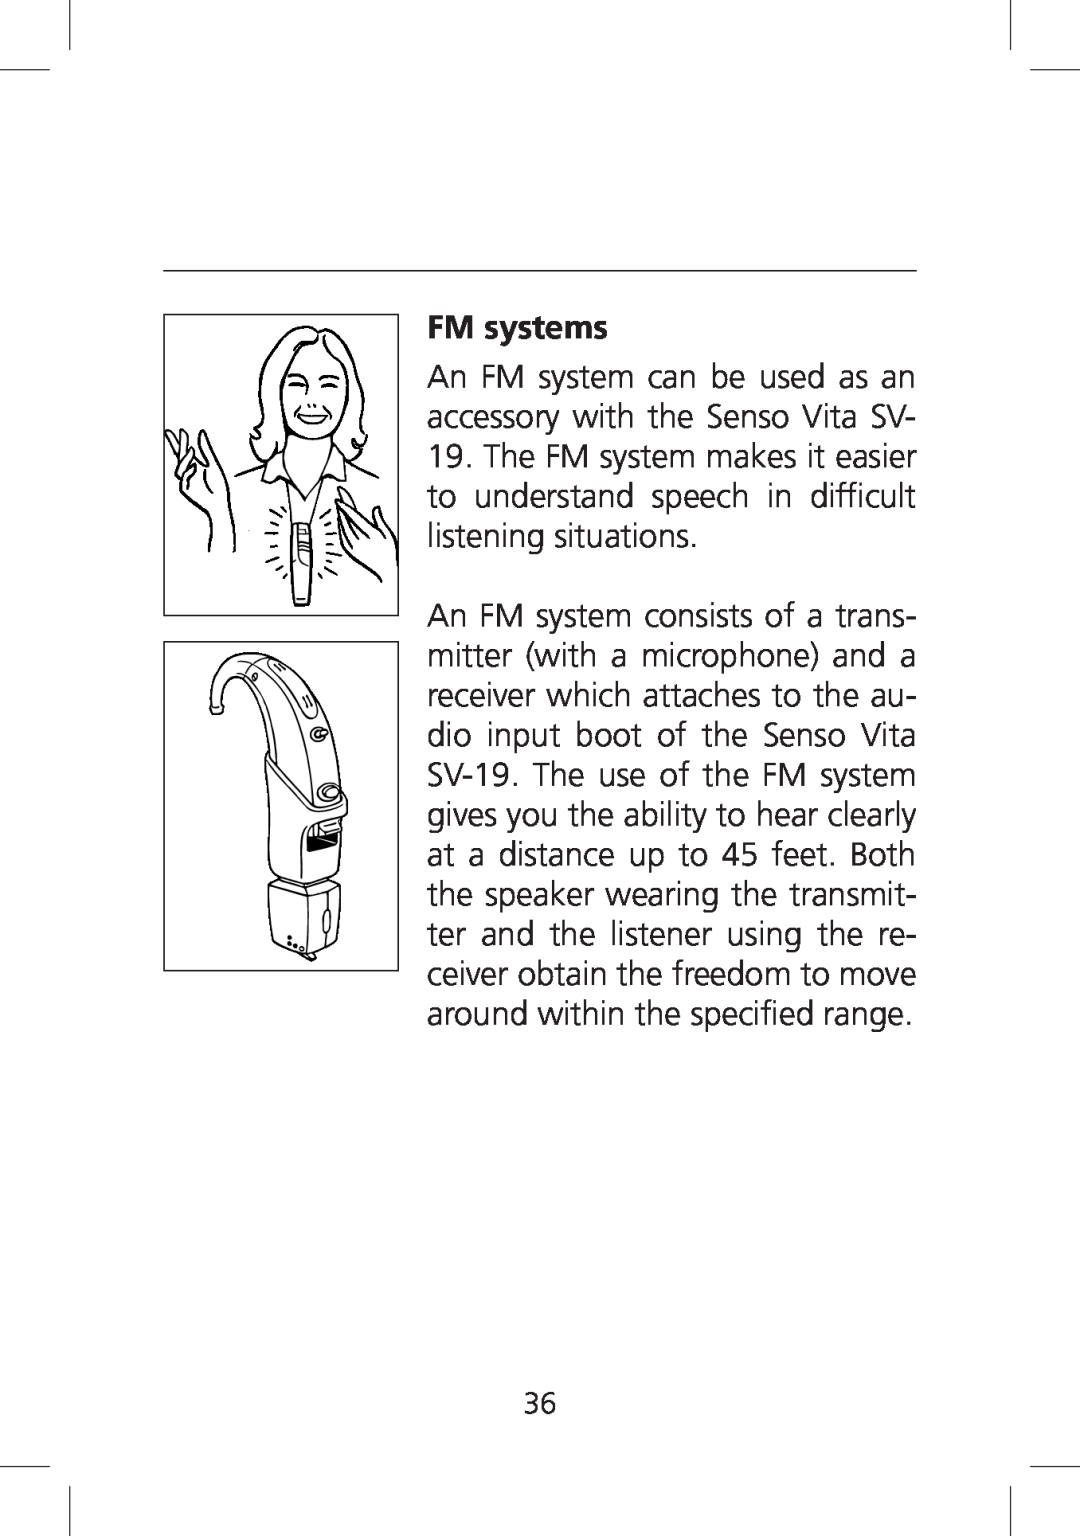 SV Sound SV-19 manual FM systems, An FM system can be used as an accessory with the Senso Vita SV 